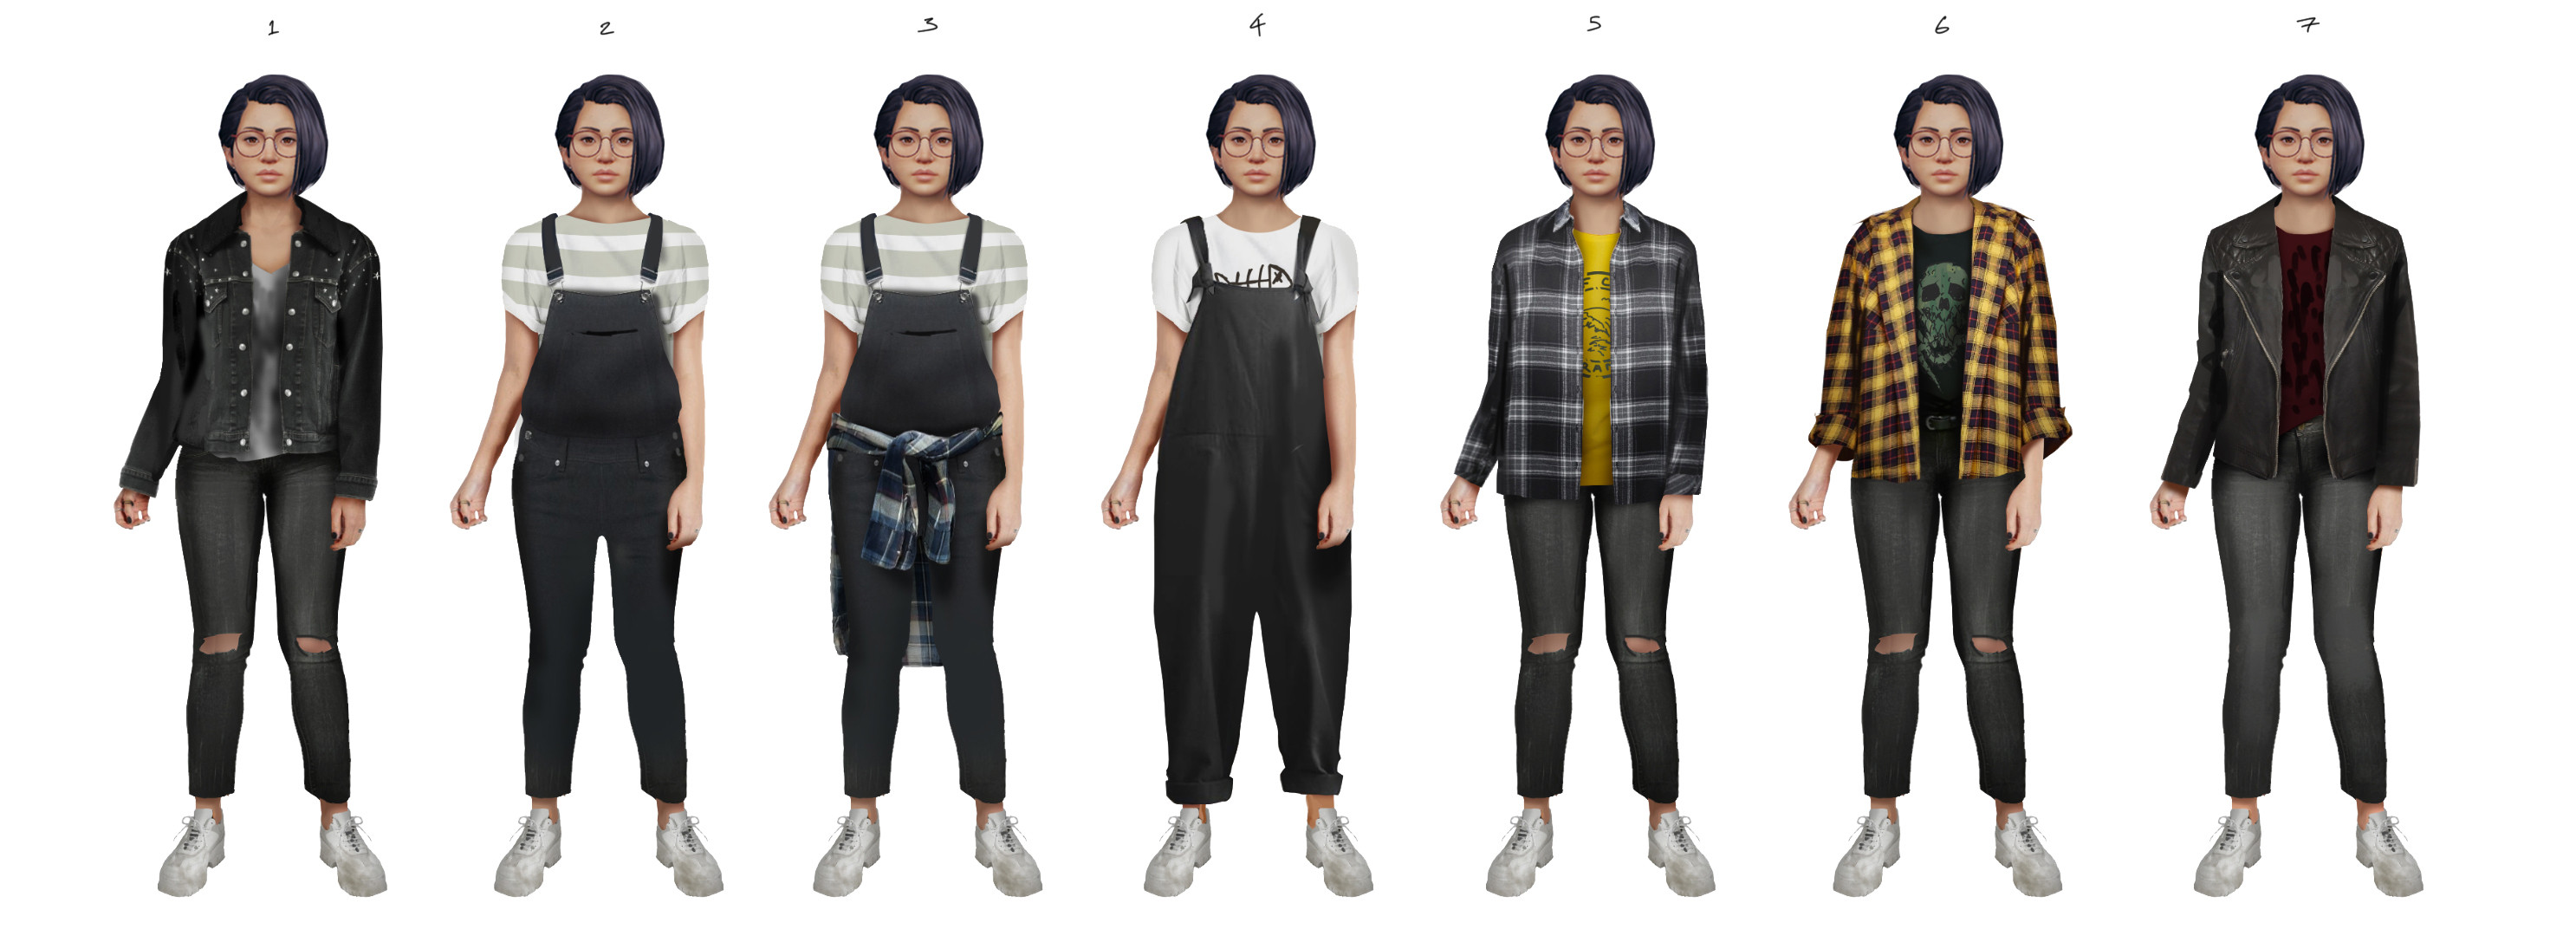 Chapter 3 - Casual Outfit Options